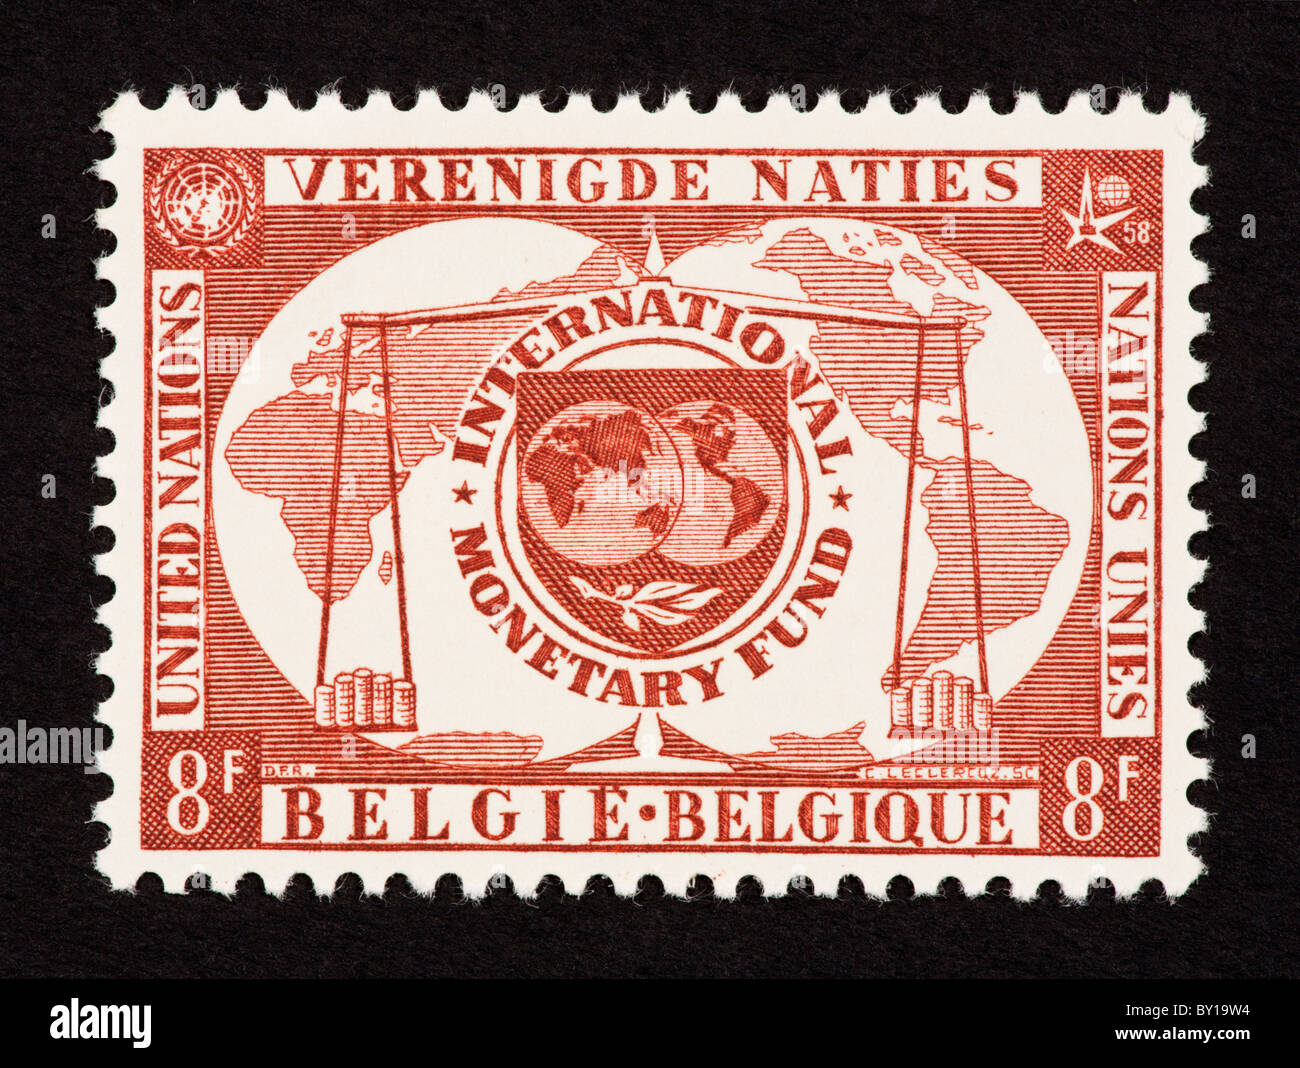 Postage stamp from Belgium depicting money, to honor the United Nations and the International Monetary Fund. Stock Photo